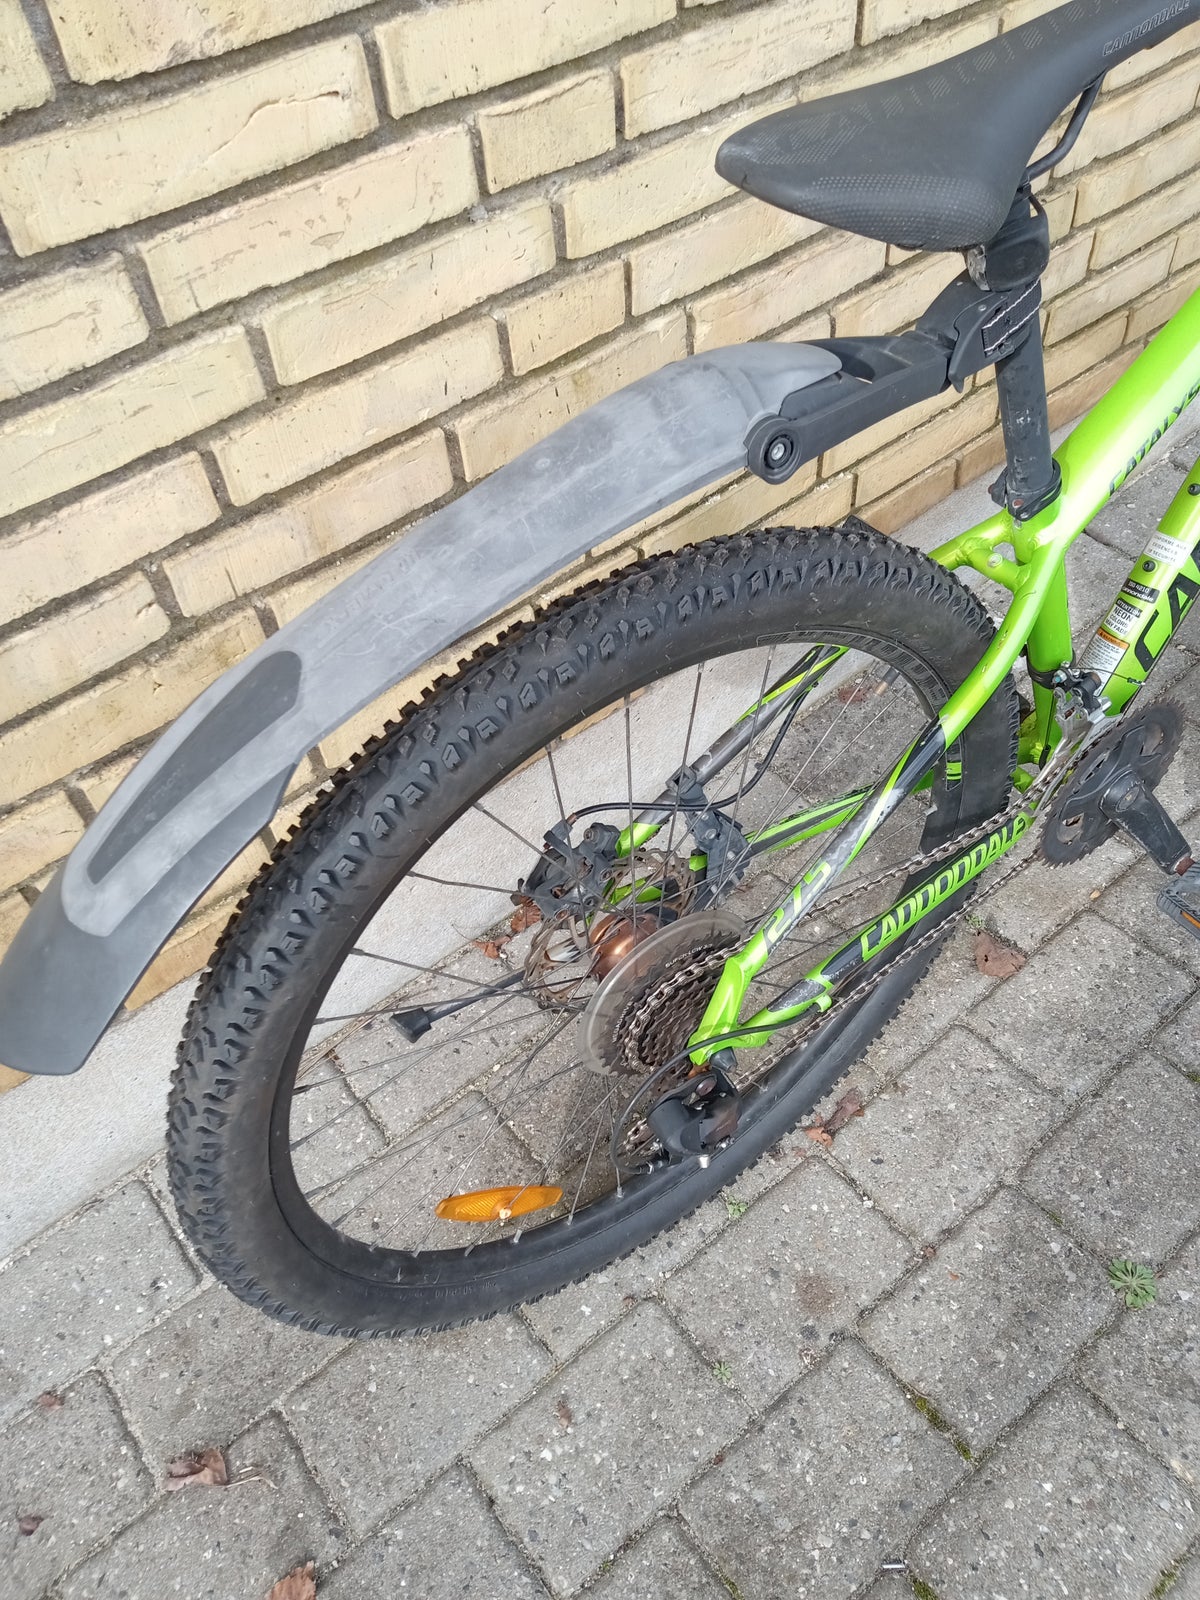 Cannondale Catalyst, hardtail, 14 tommer